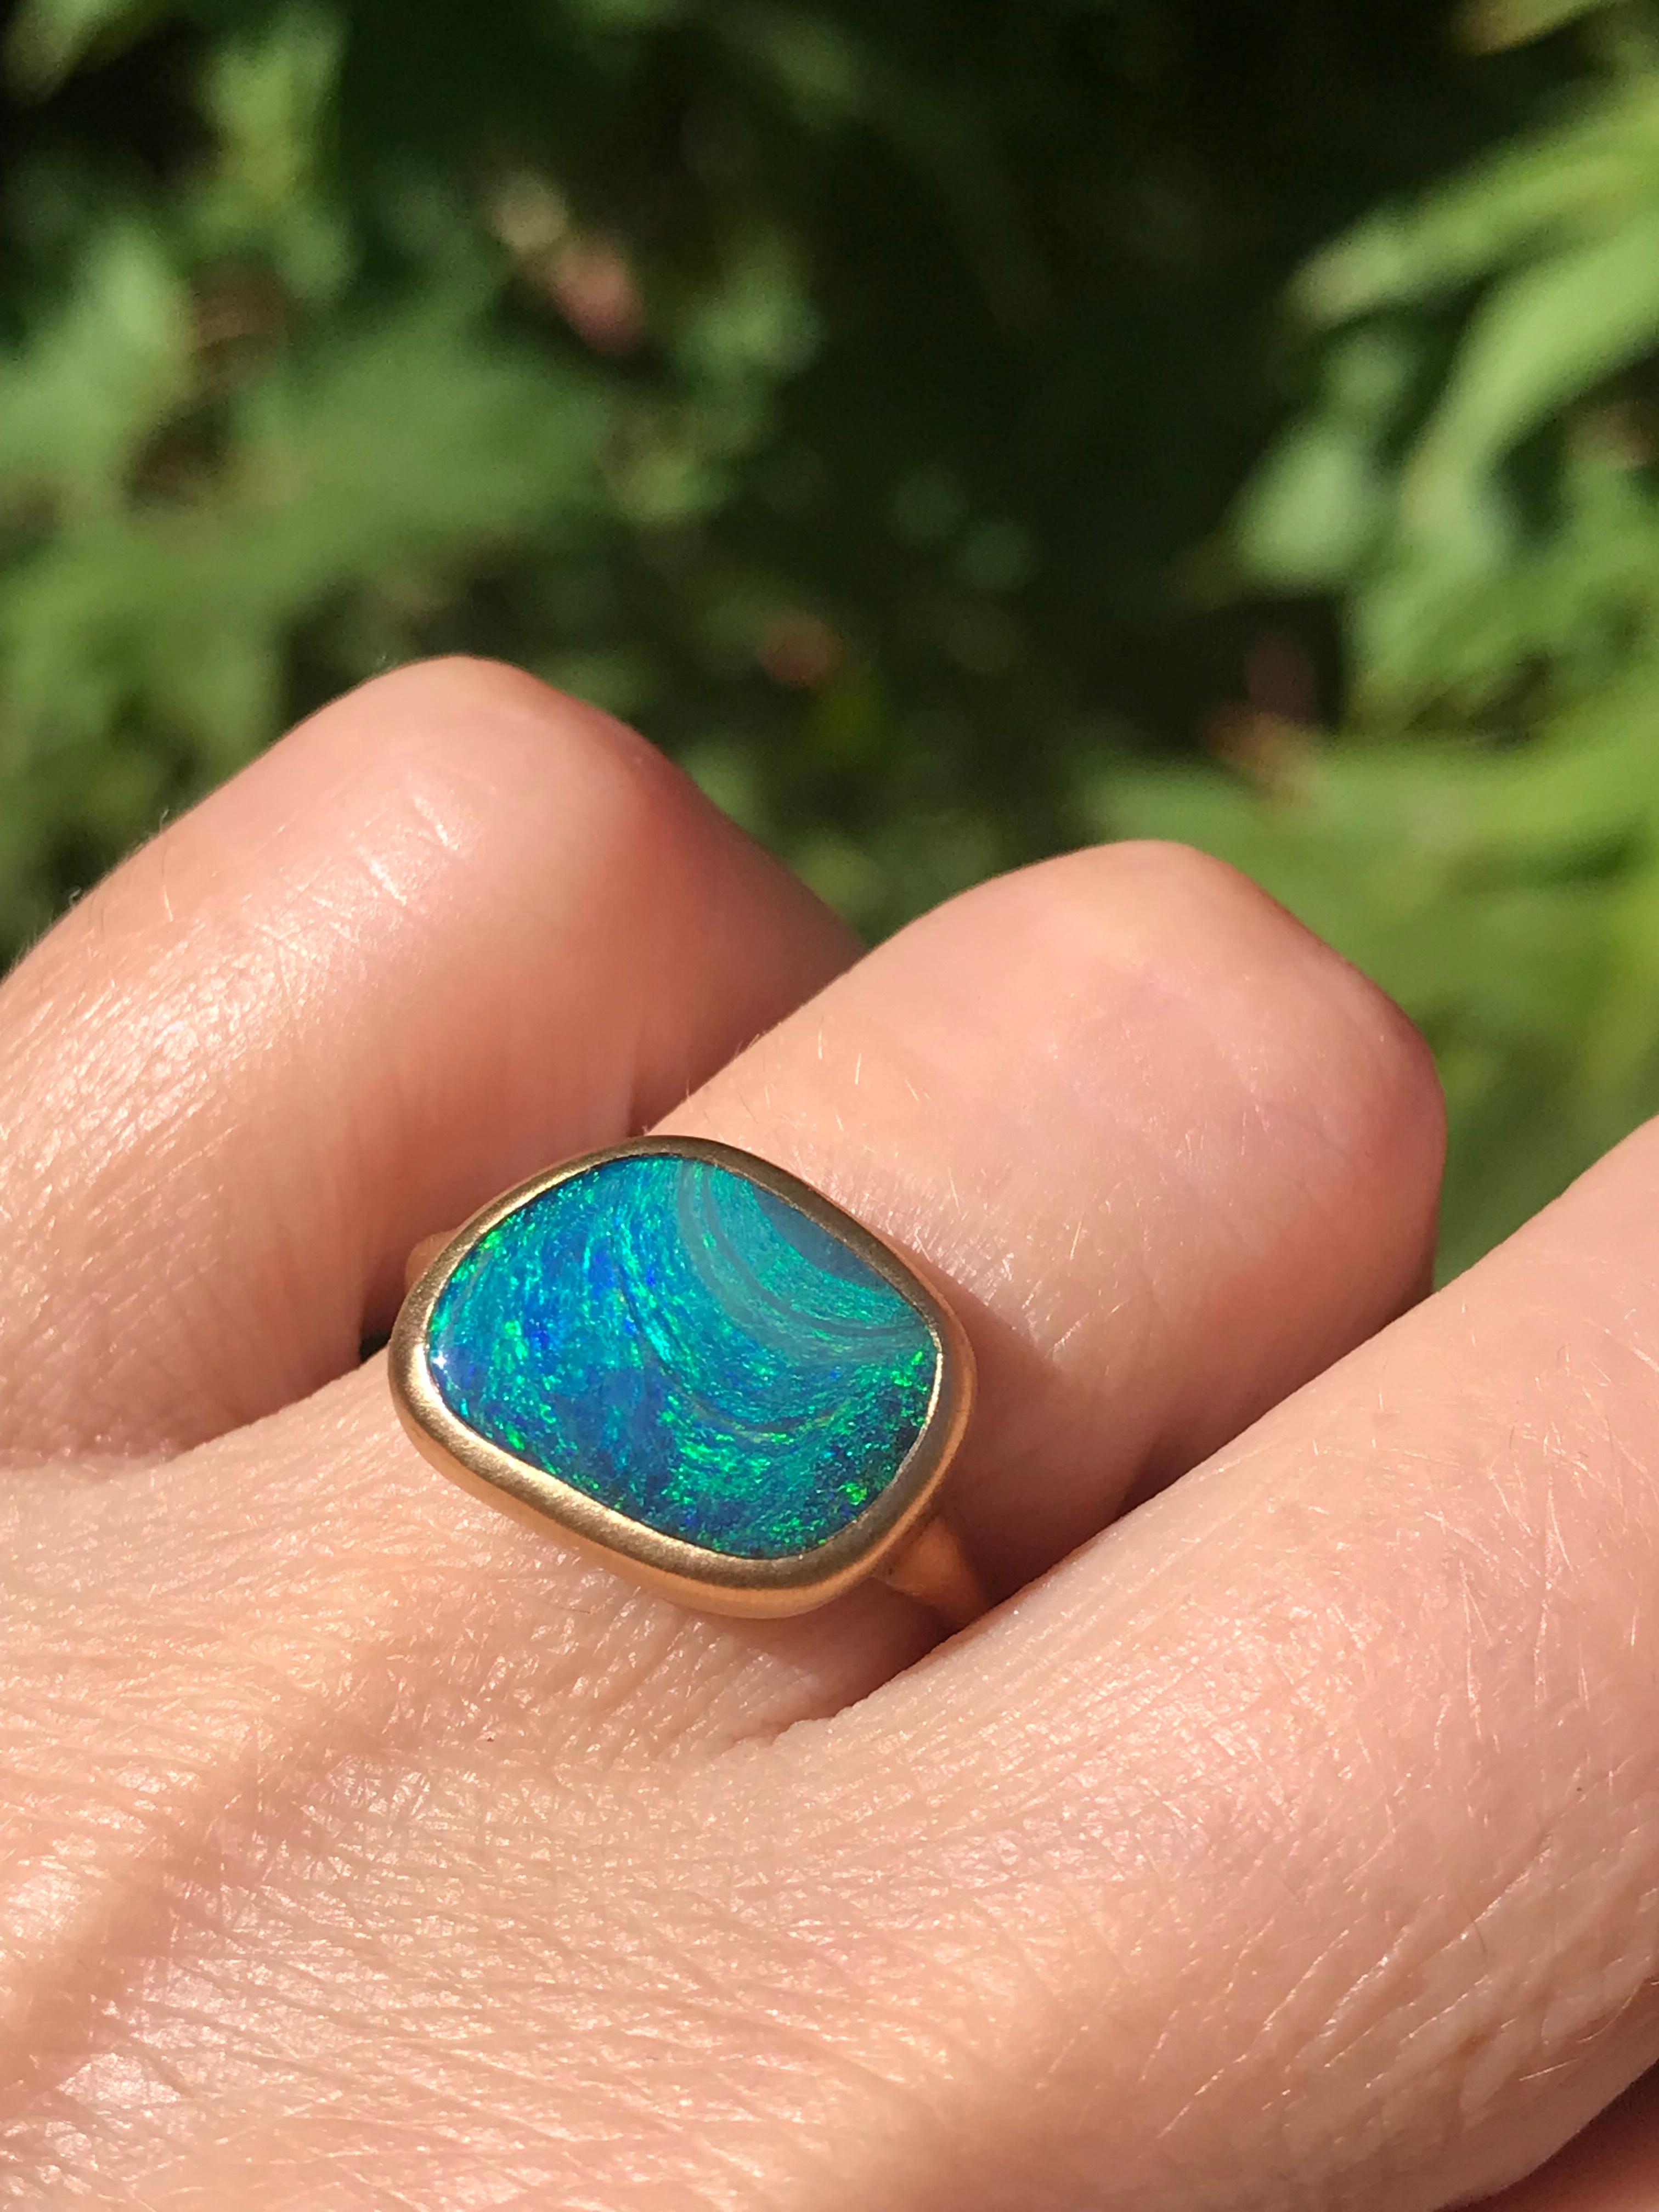 Dalben design One of a kind 18 kt yellow  gold ring with a blue green colors solid Australian Boulder Opal weight 5,38 carats  .
Ring size  US 6   -  EU 52 re-sizable .  
Bezels setting dimension:  
max width 14,3 mm,  
max height 11,2 mm. 
The ring